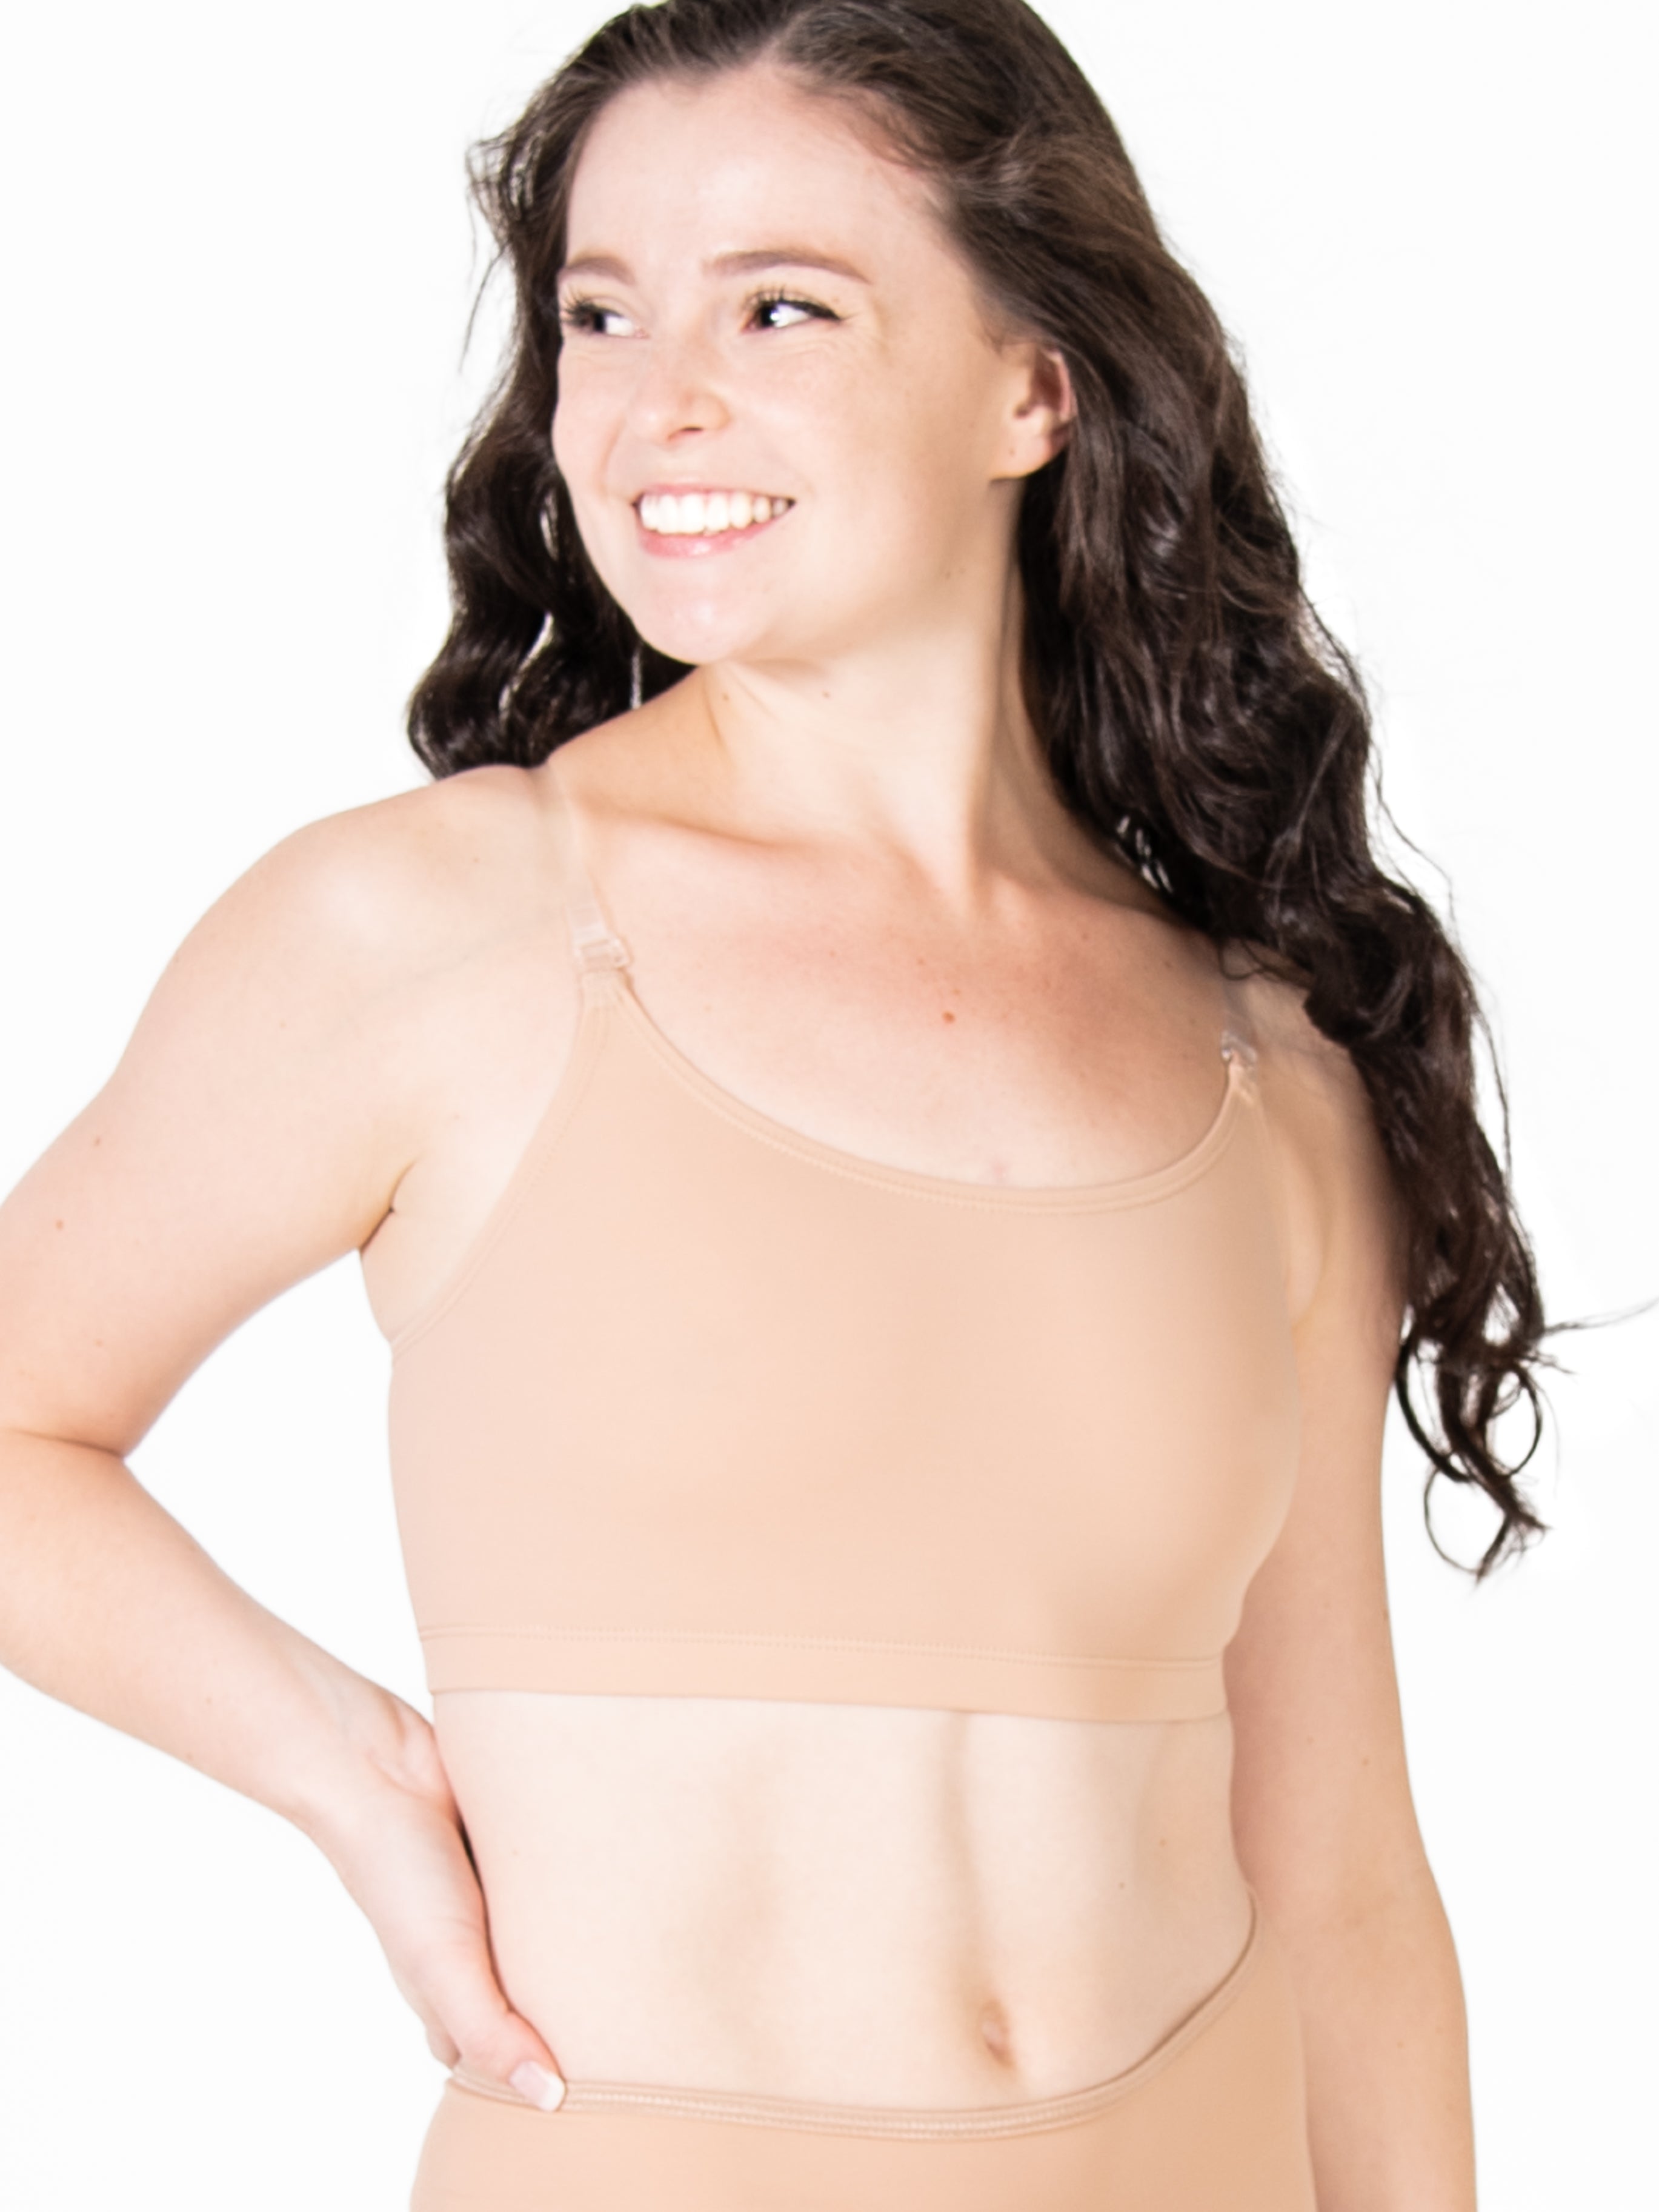 Body Wrappers 0261 Girls' Pull-On Bra (12-14, Nude)